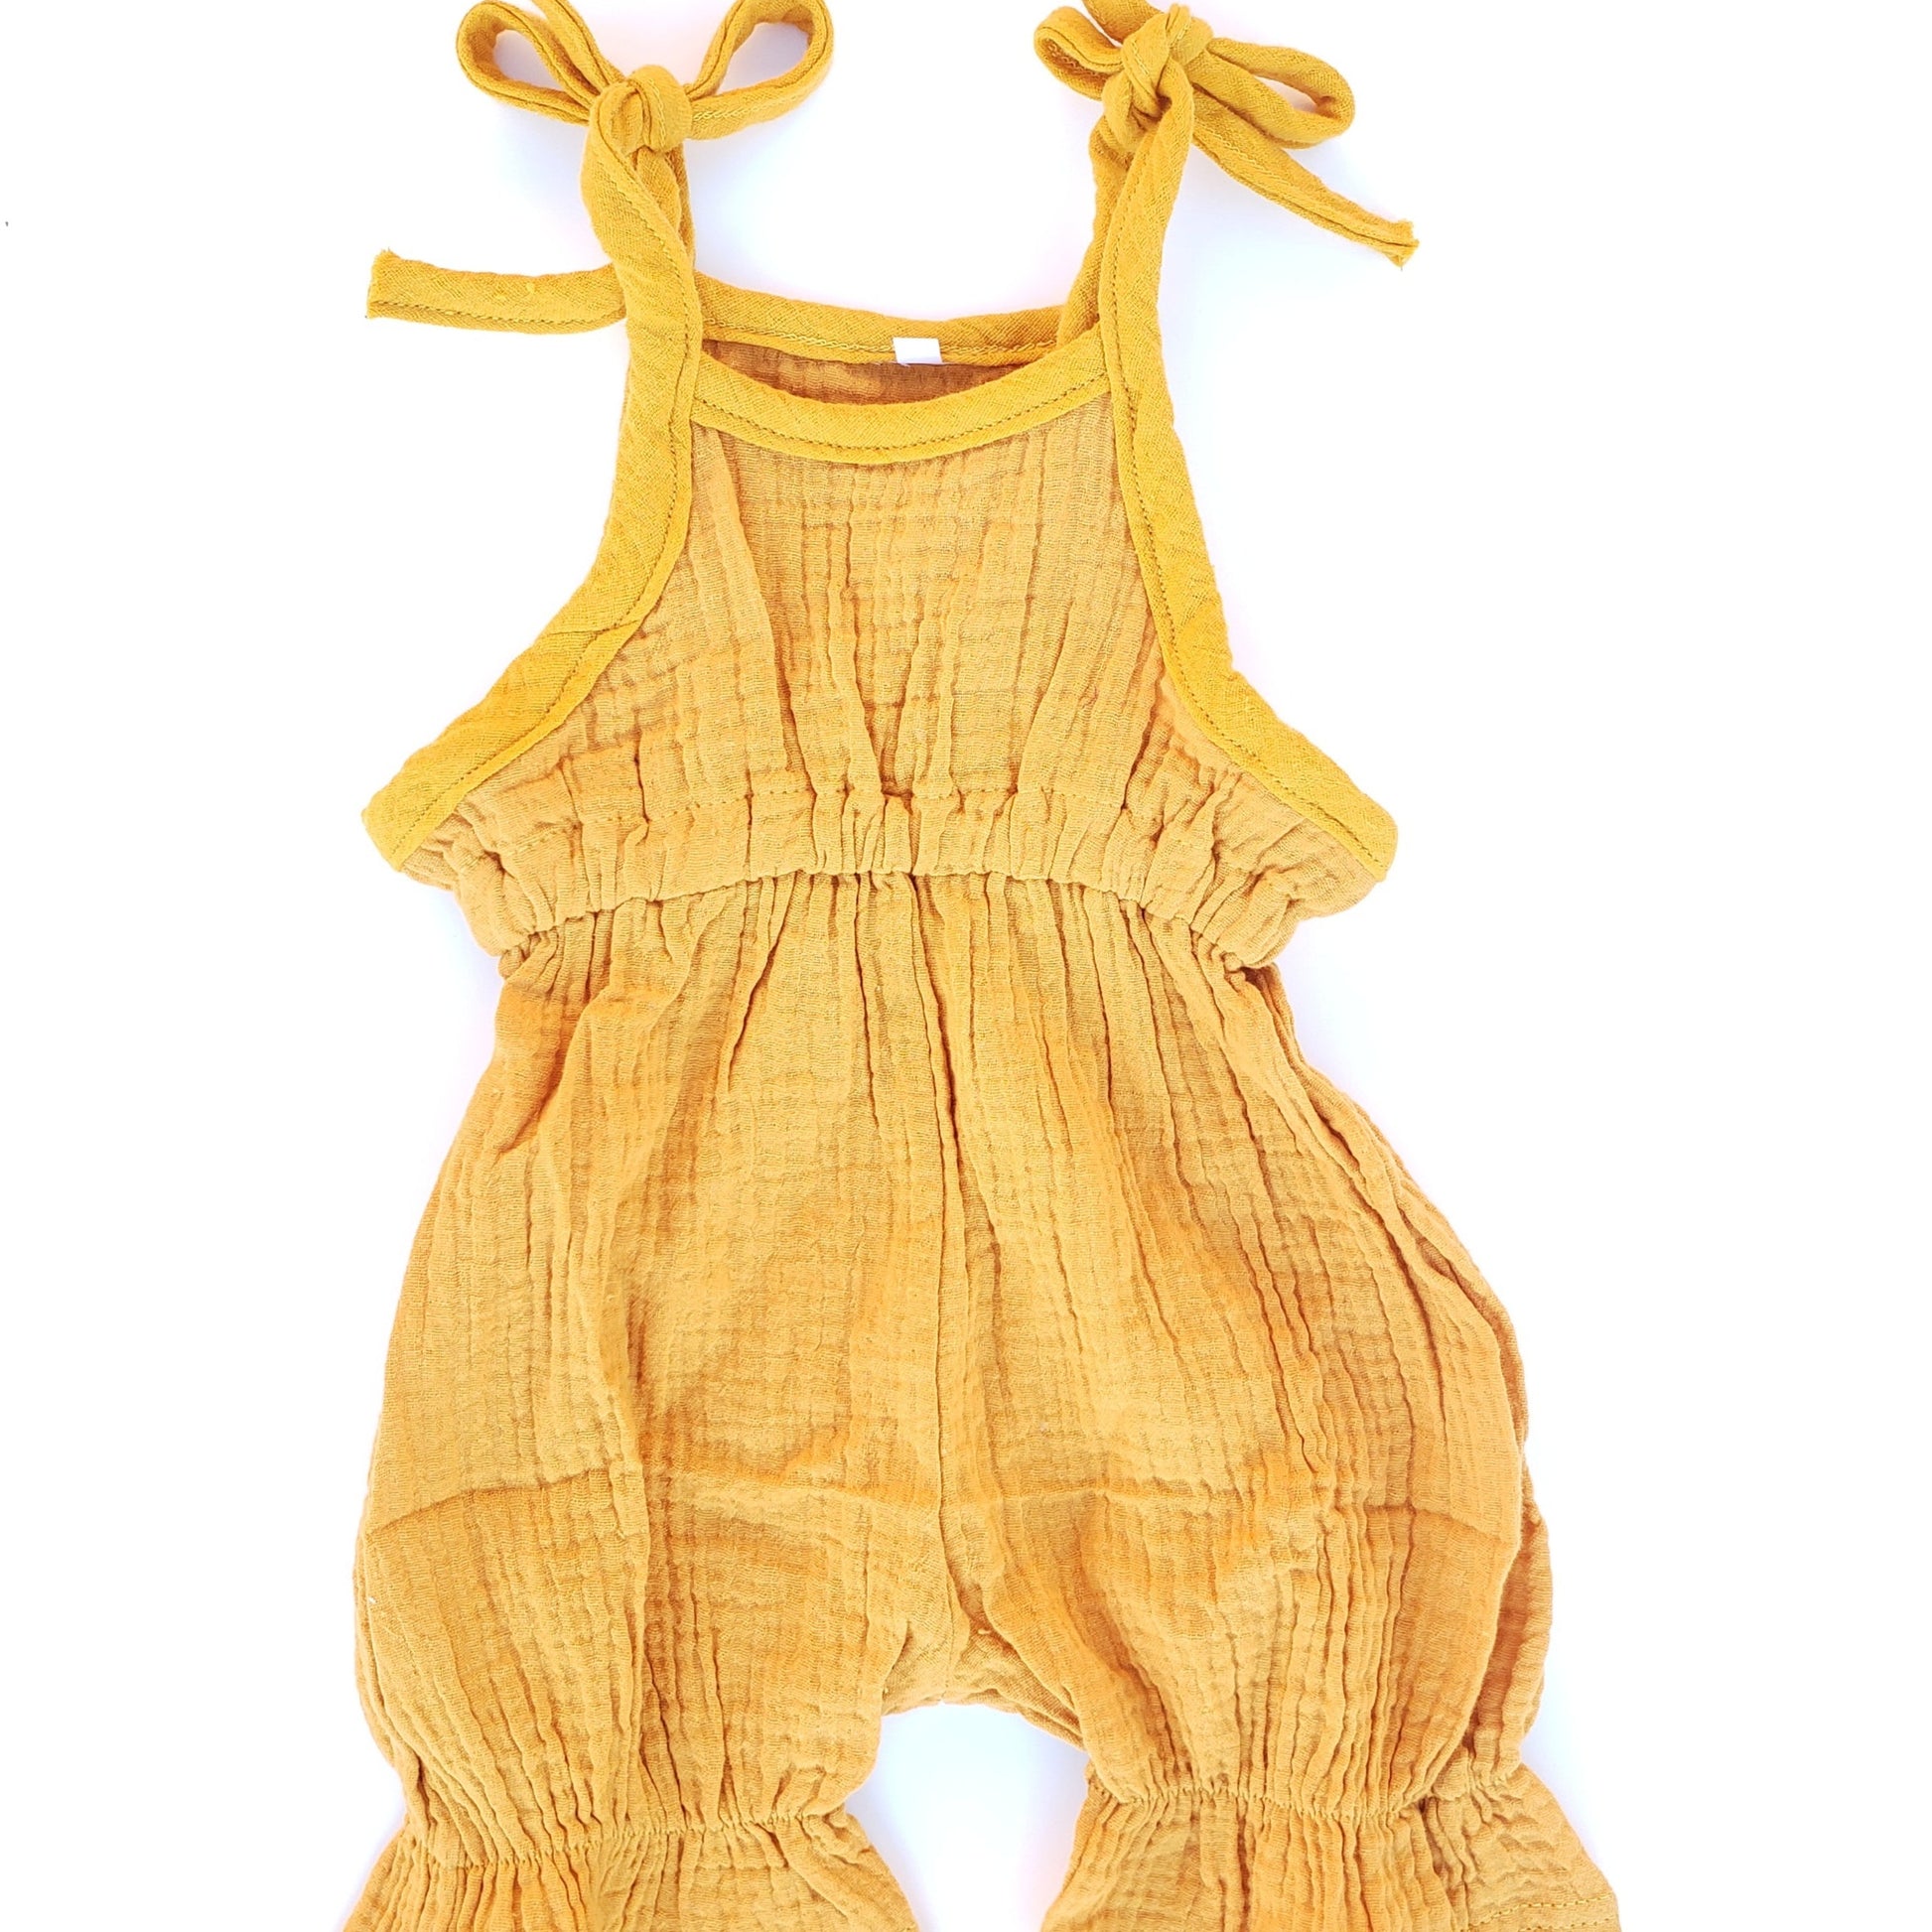 Aurora Tie Romper - Baby Bear Outfitters